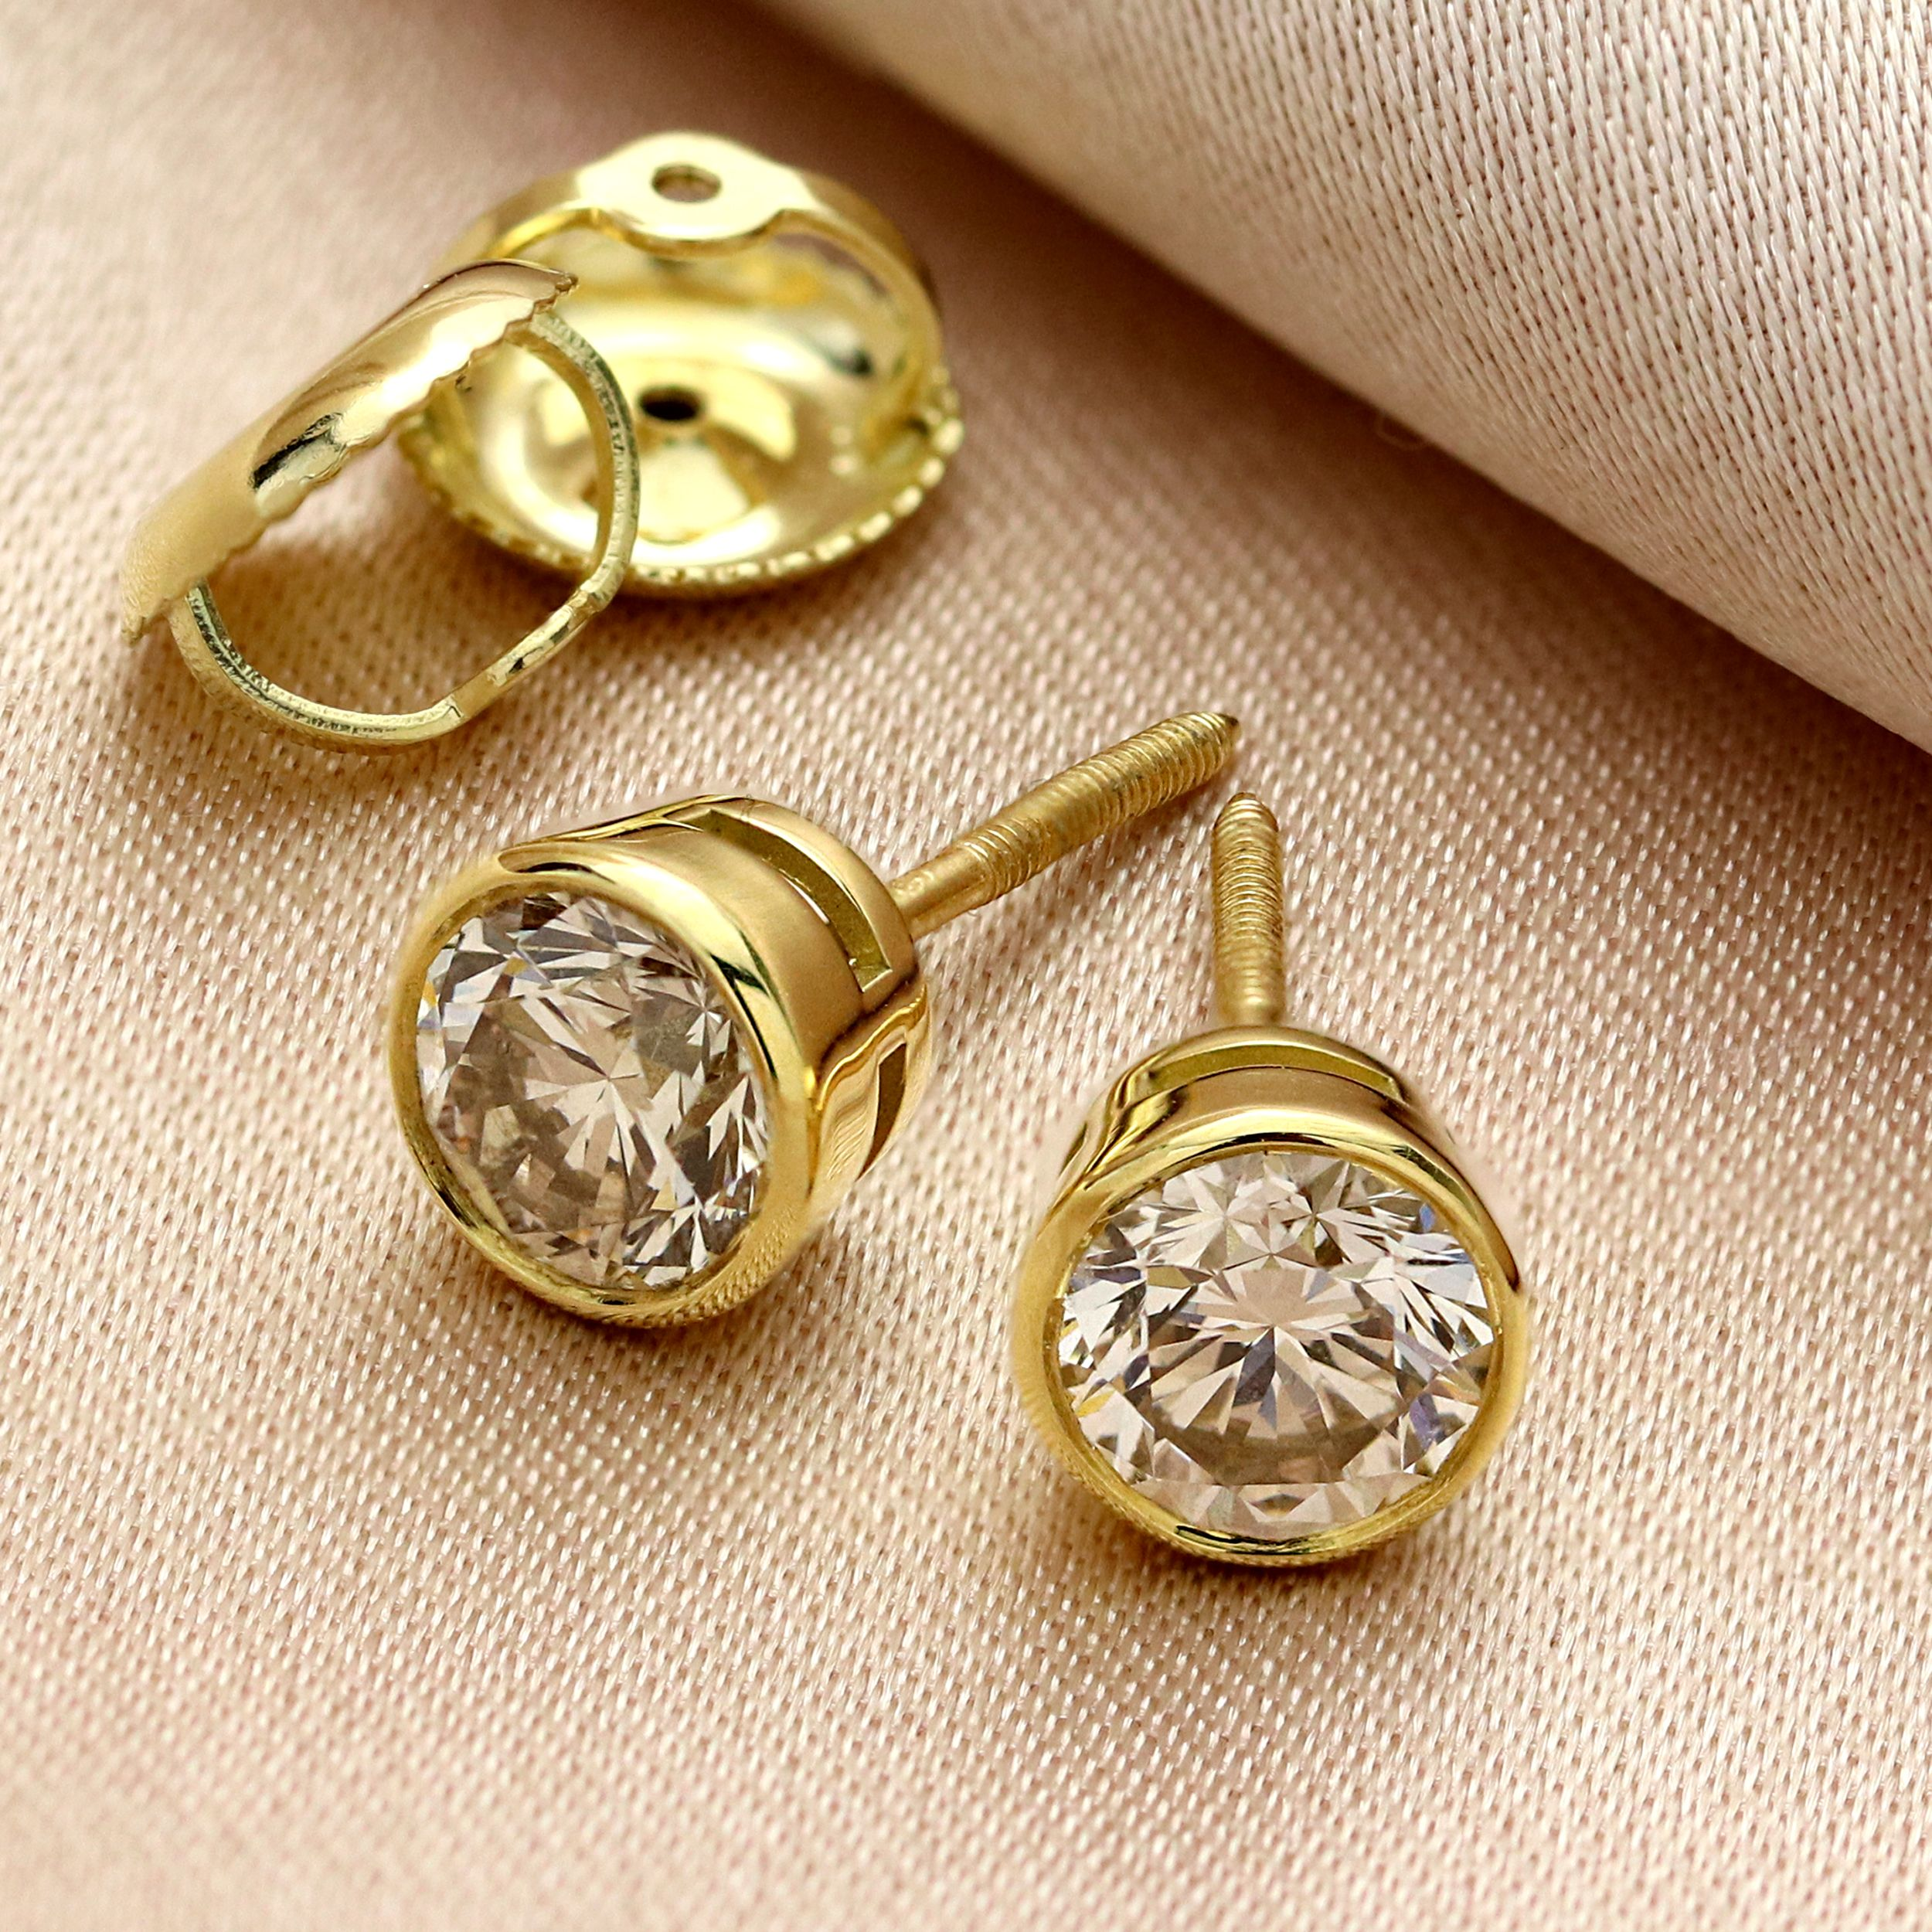 Clip Earrings Findings: Small Screw Back s & Parts